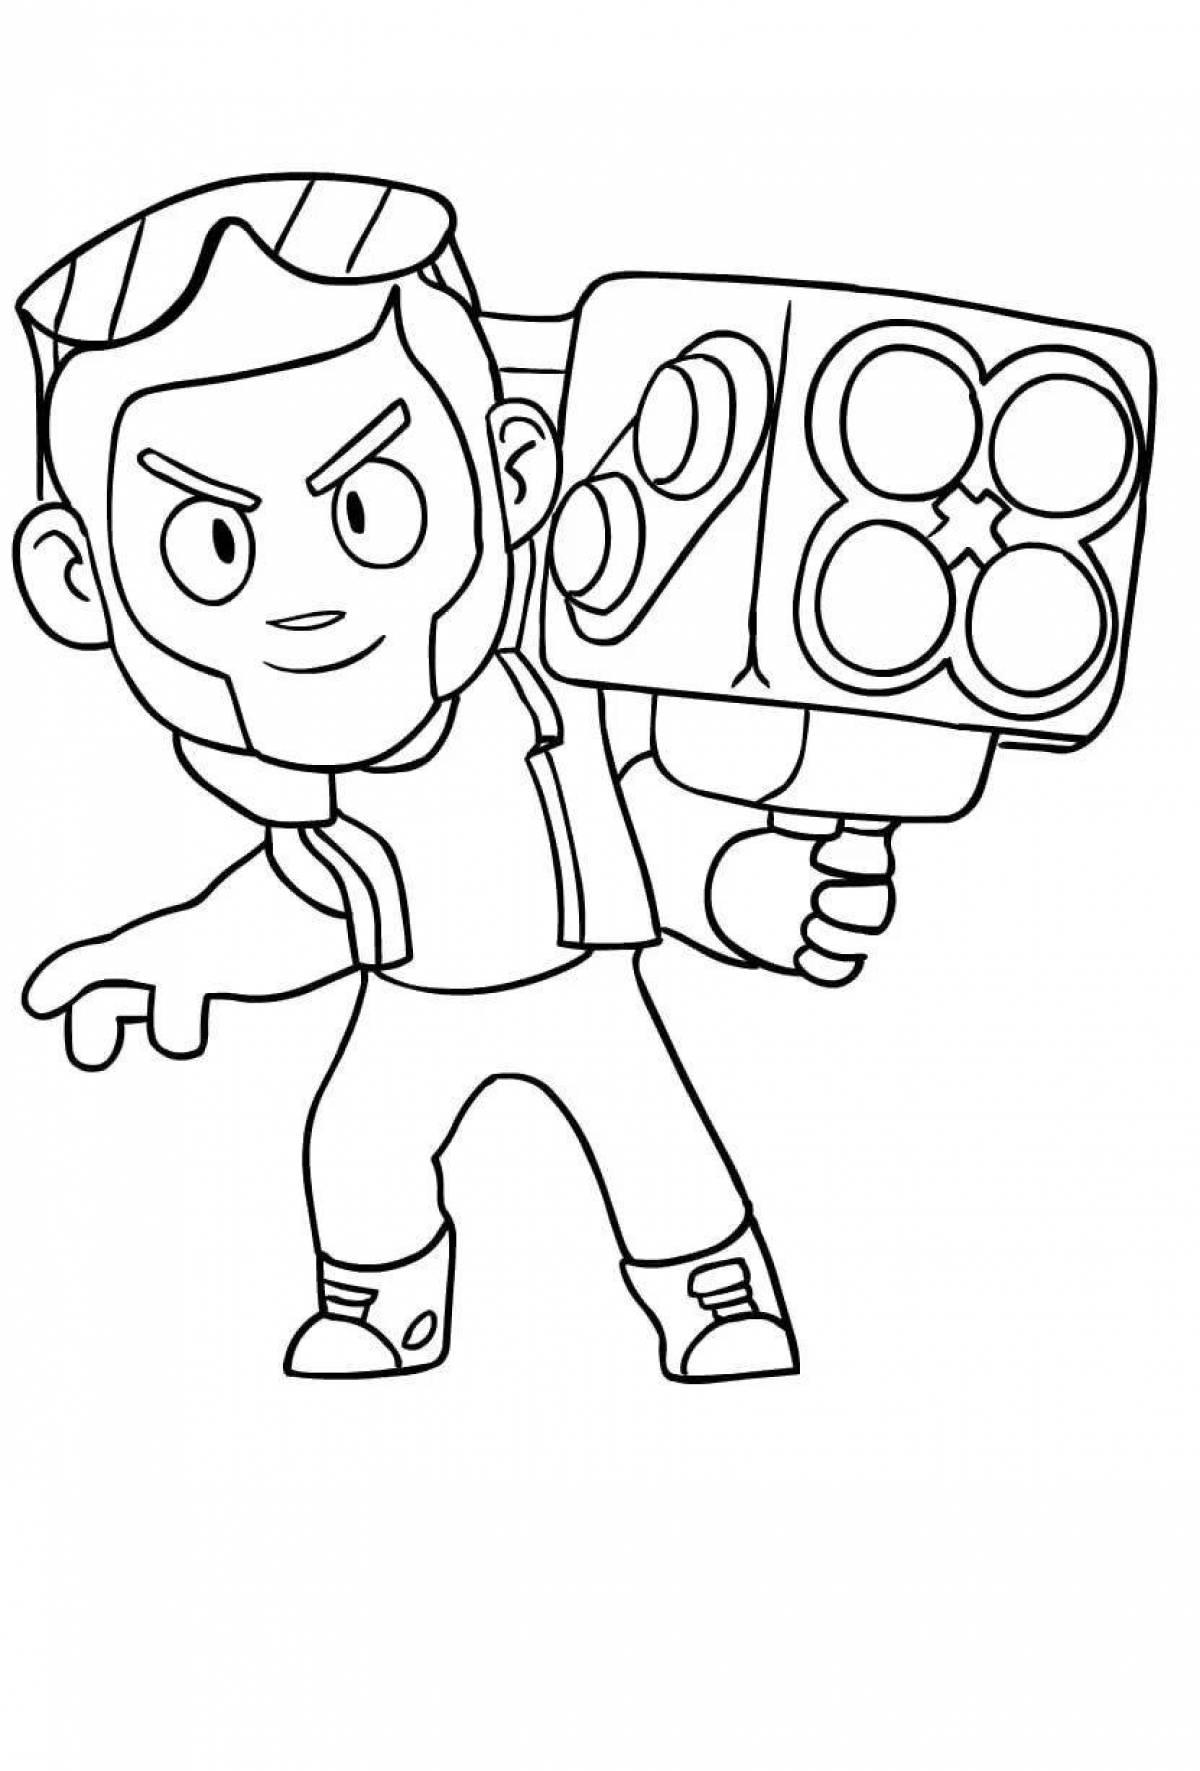 Amazing dynamike coloring page